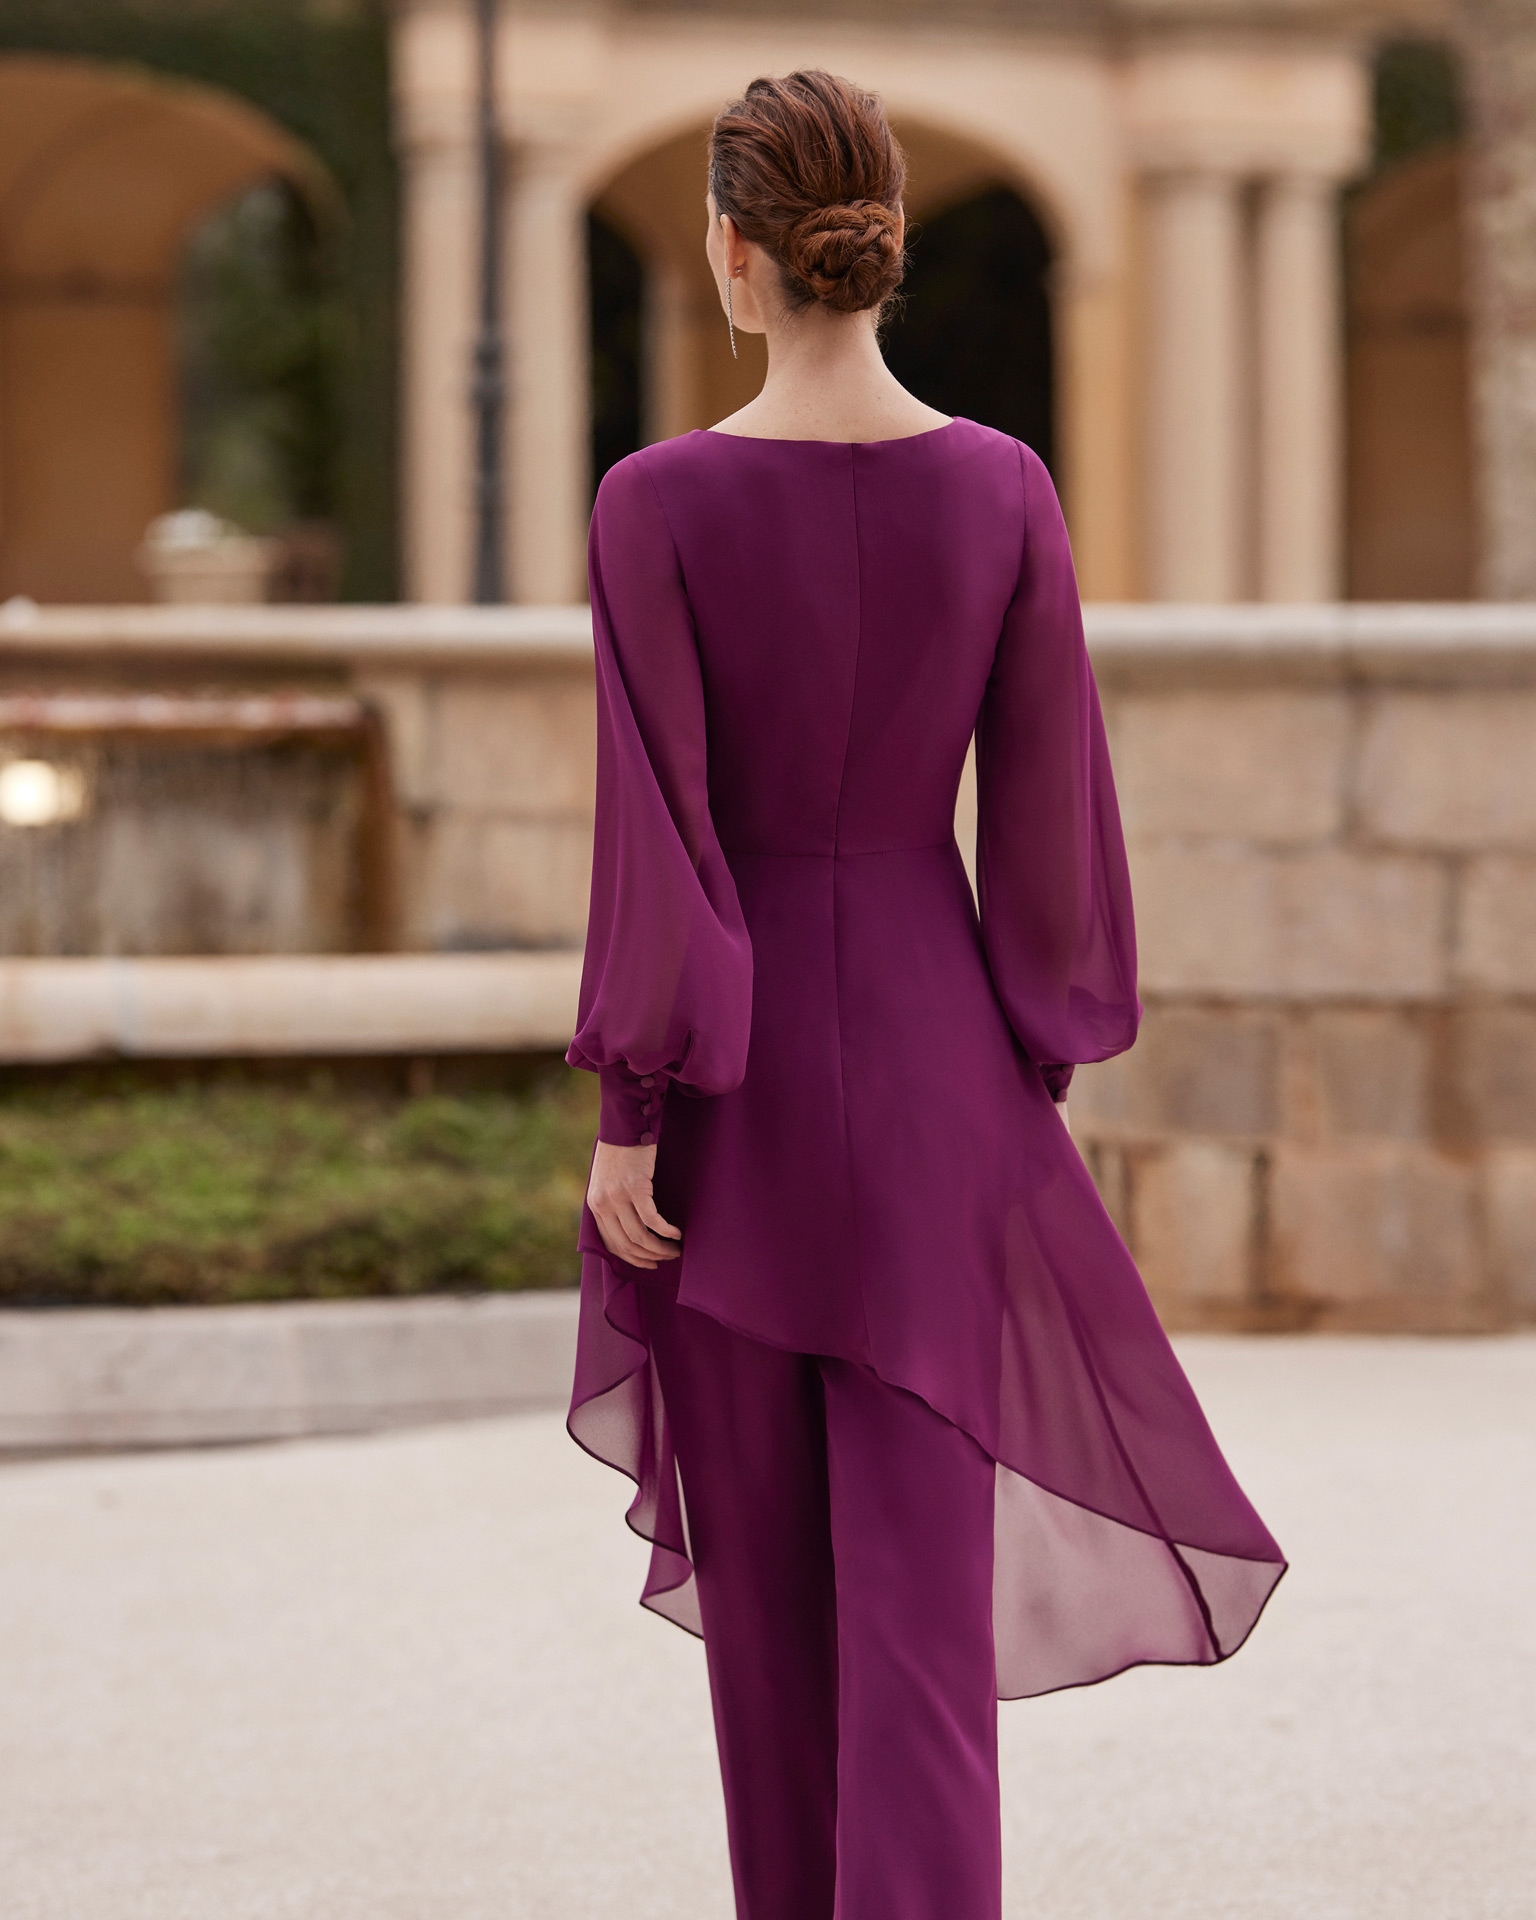 Simple evening pantsuit. Crafted in georgette with lace beadwork details. With V-neckline and puffed sleeves. Couture Club outfit. MARFIL_BARCELONA.